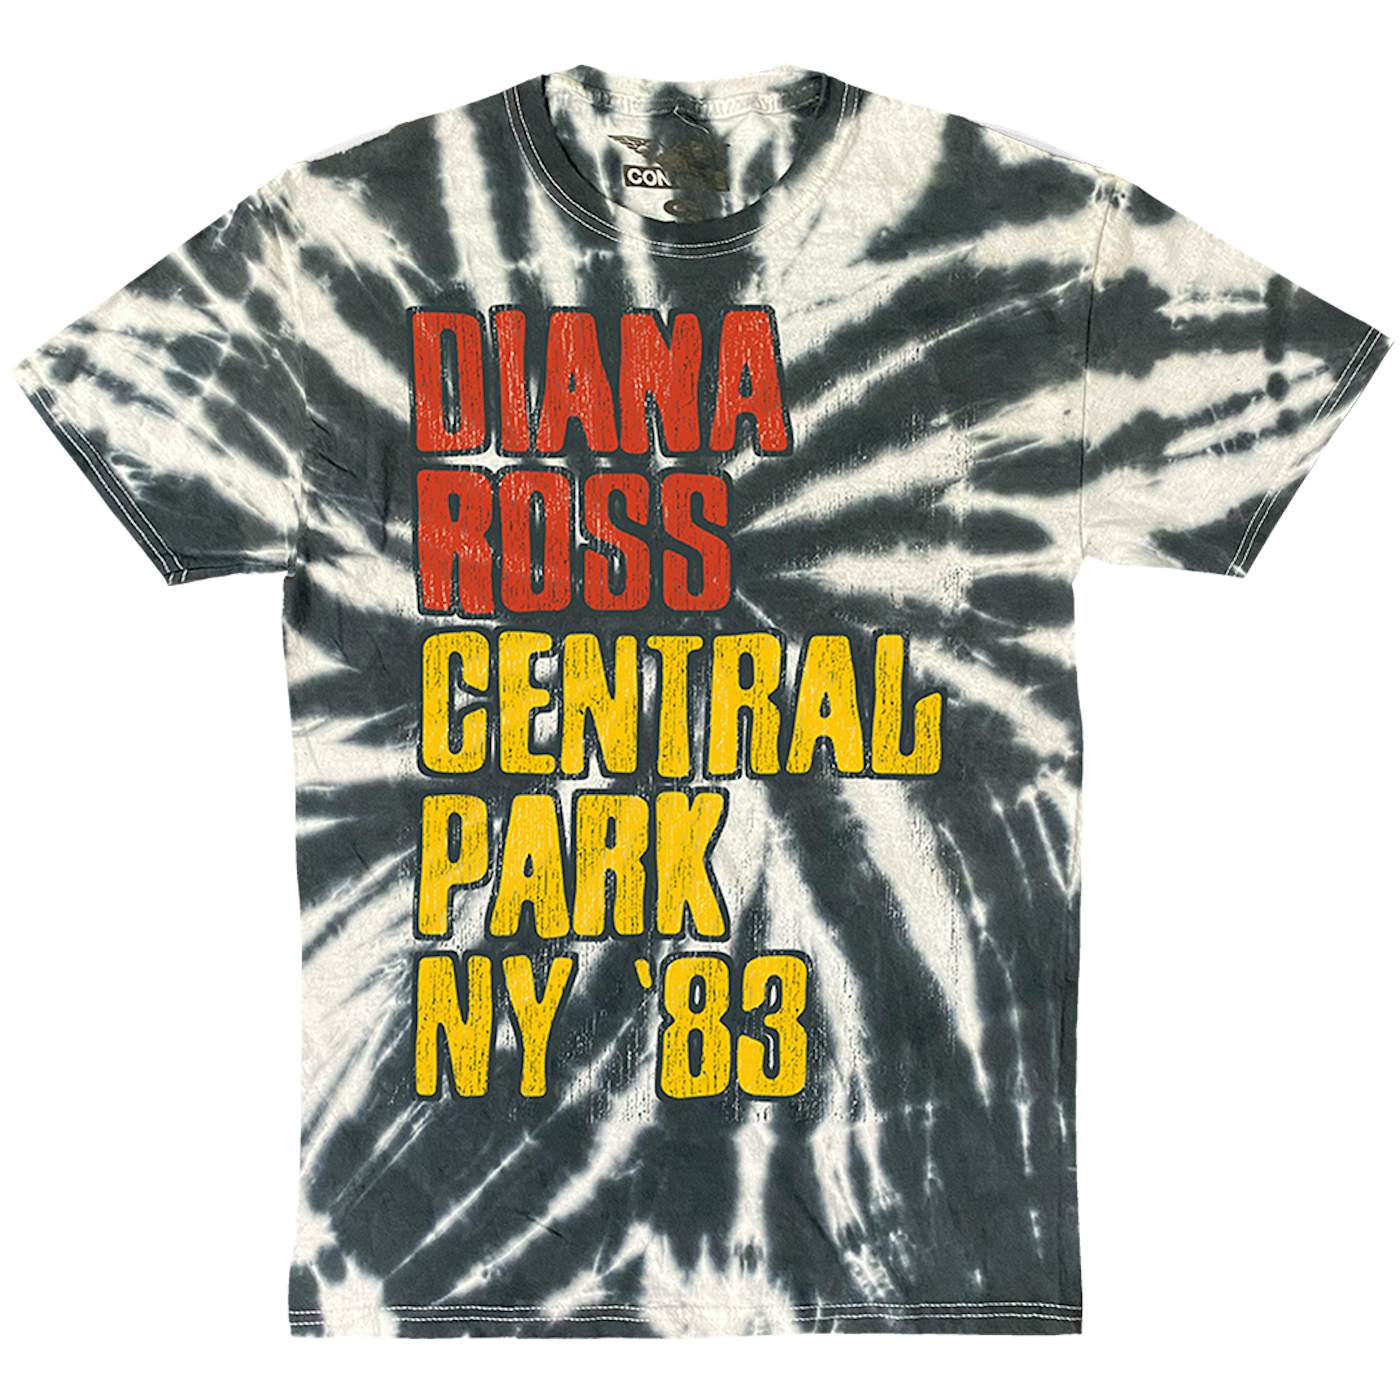 Diana Ross "Central Park 83" T-Shirt in Tie Dye